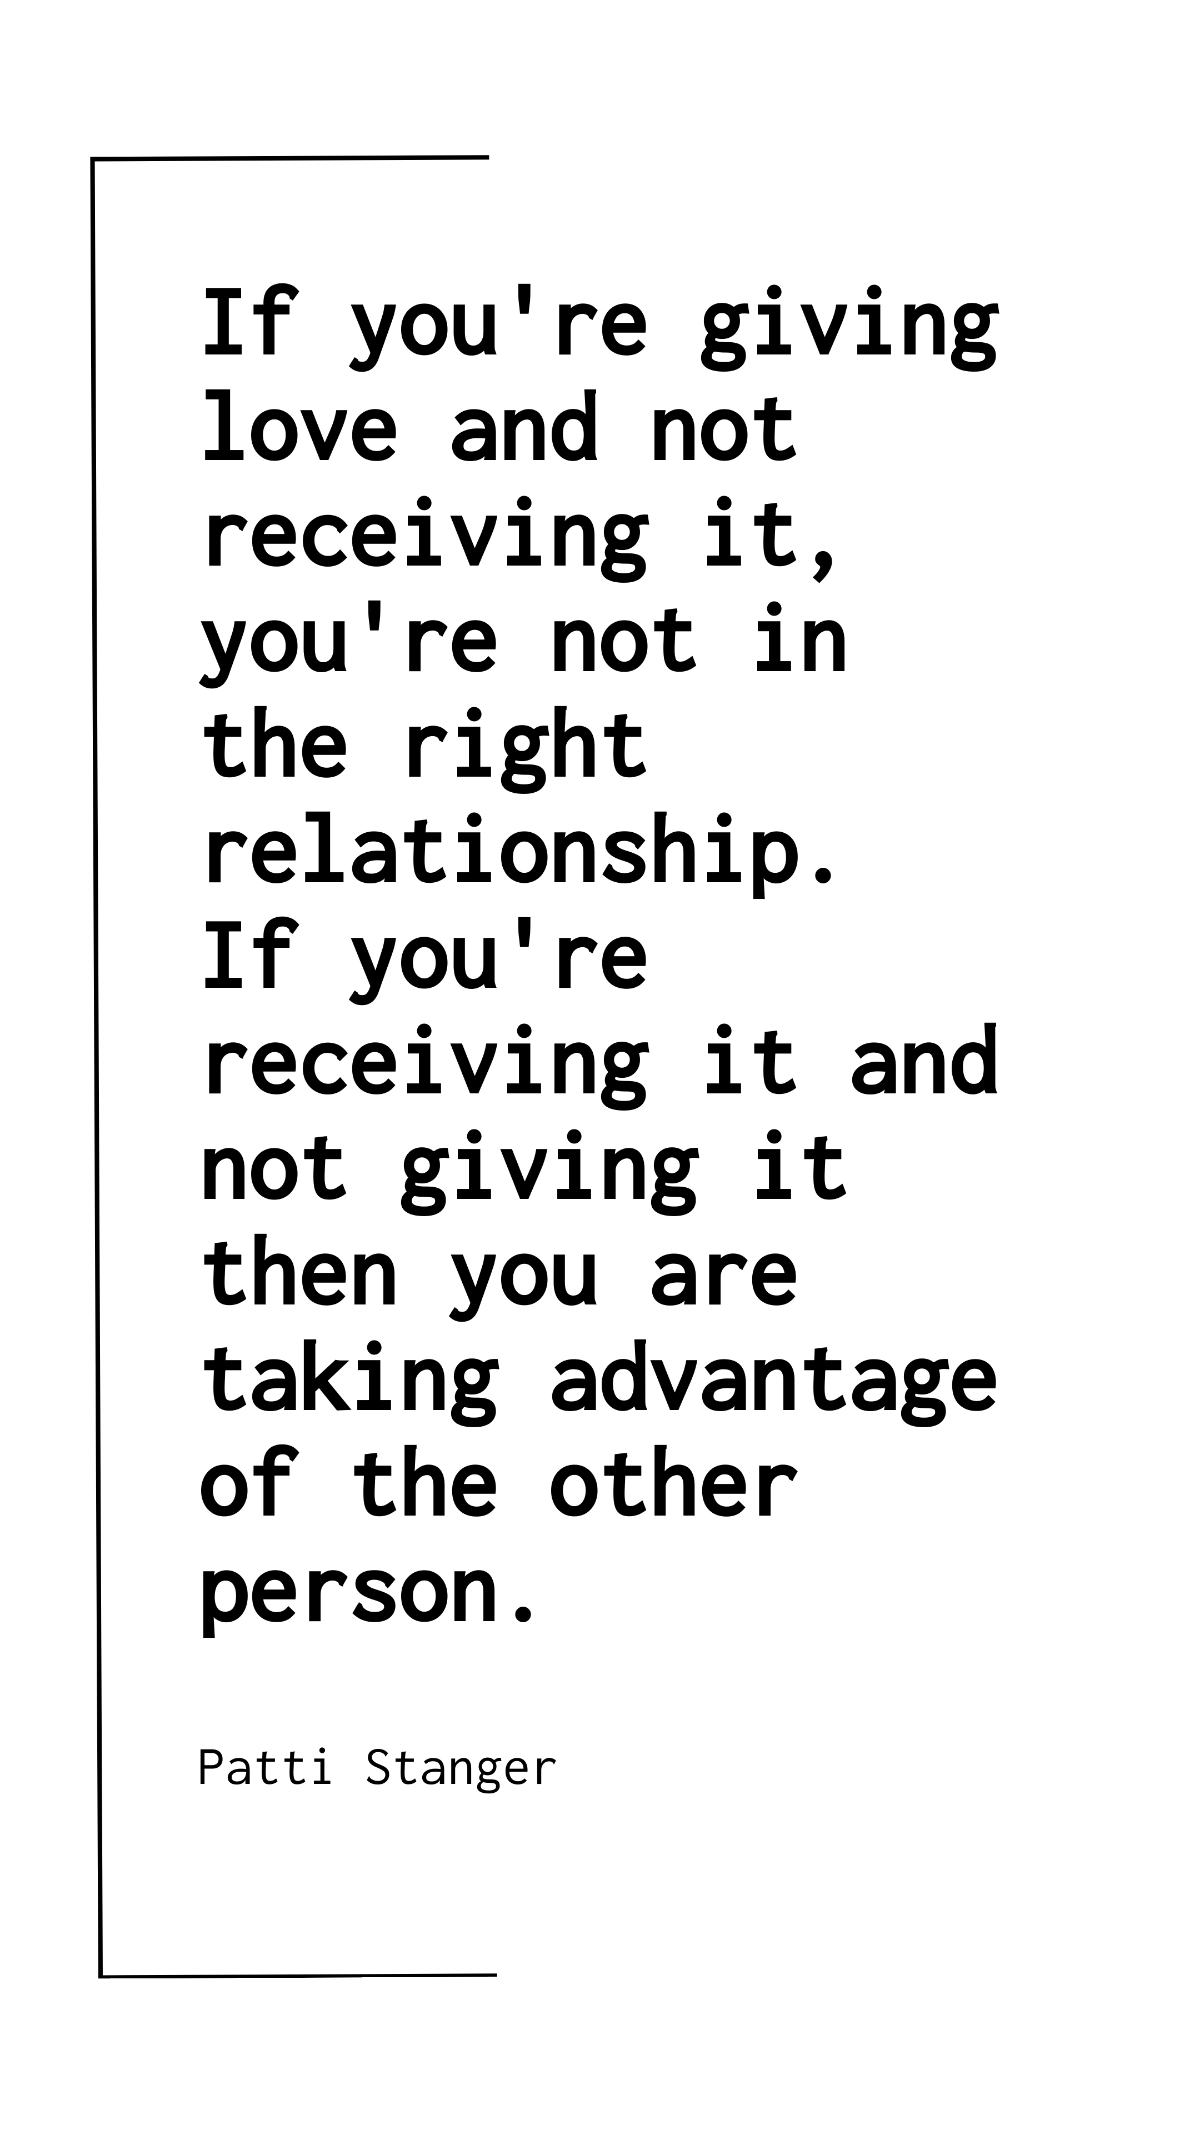 Patti Stanger - If you're giving love and not receiving it, you're not in the right relationship. If you're receiving it and not giving it then you are taking advantage of the other person. Template